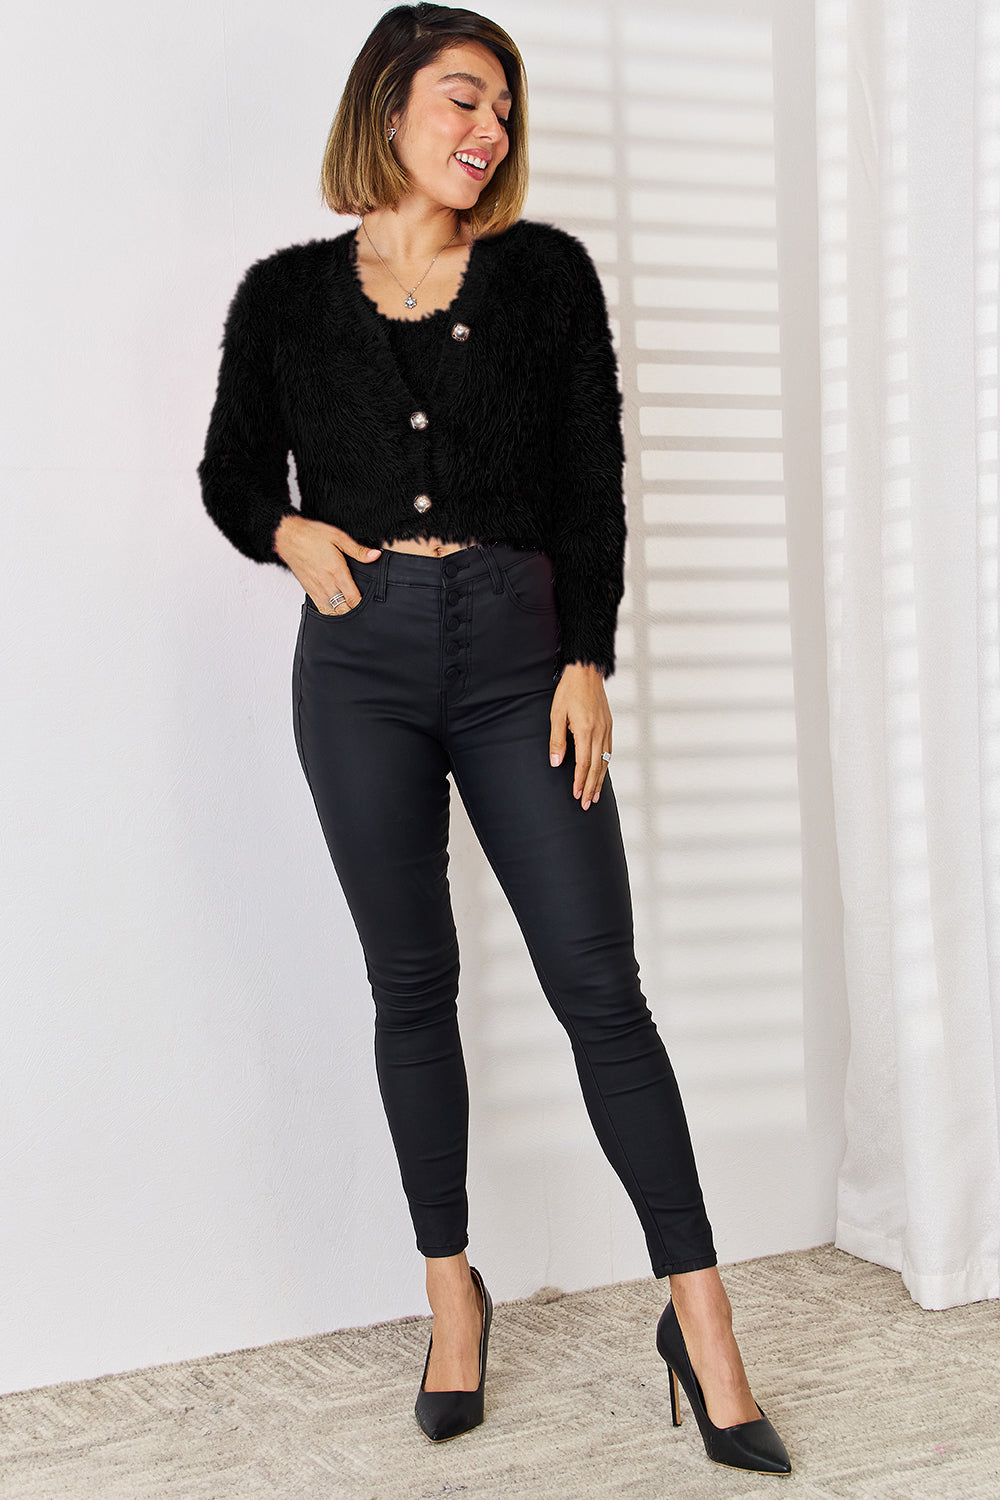 Scoop Neck Vest and Cardigan Sweater Set - Thandynie